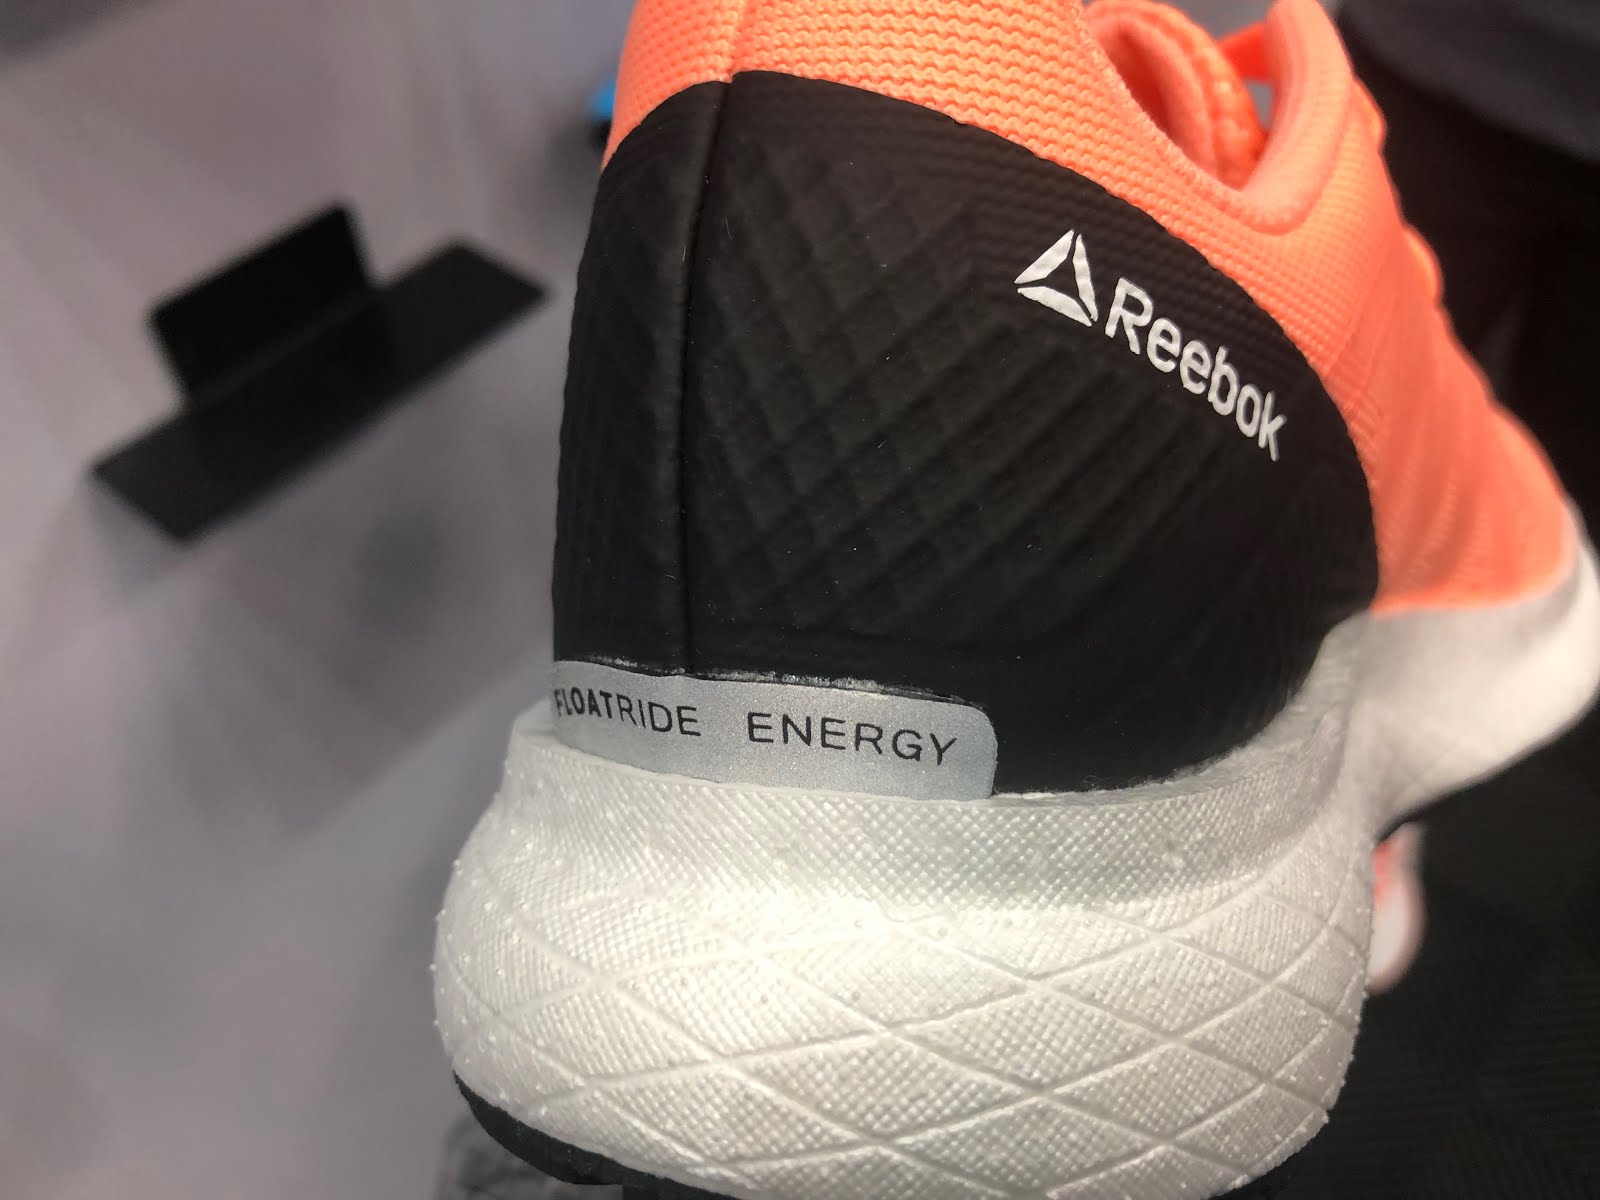 Reebok 2019 Previews: New Forever Floatride Energy! Updates: Float Ride Run 2.0, Grasse Road 2 ST, Harmony 3